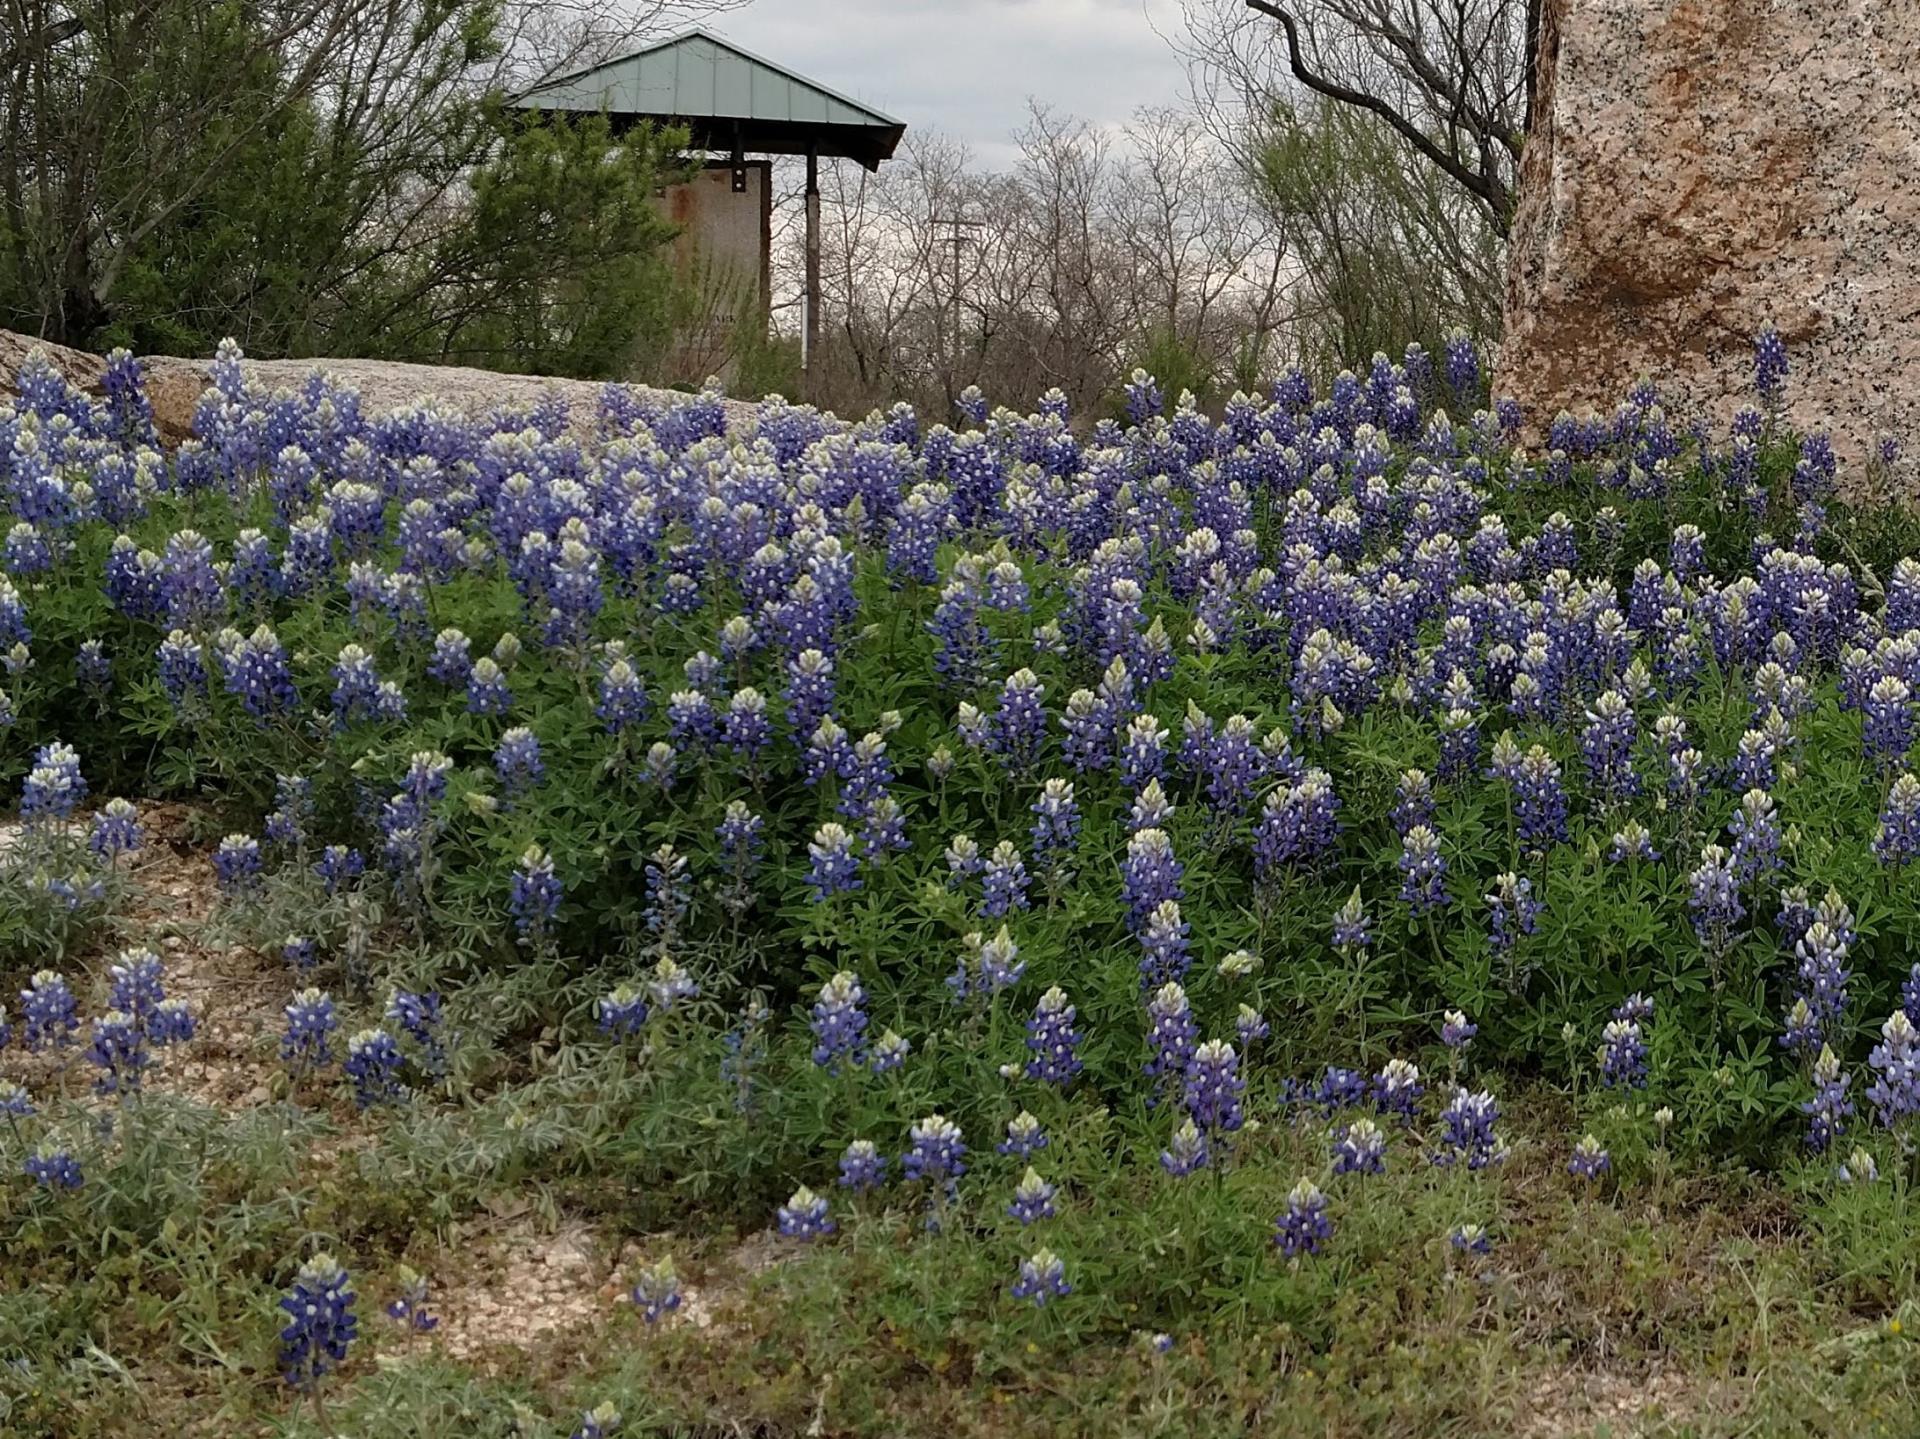 cropped Bluebonnets a piece of granite and the Interpretive Center in the background March 2019